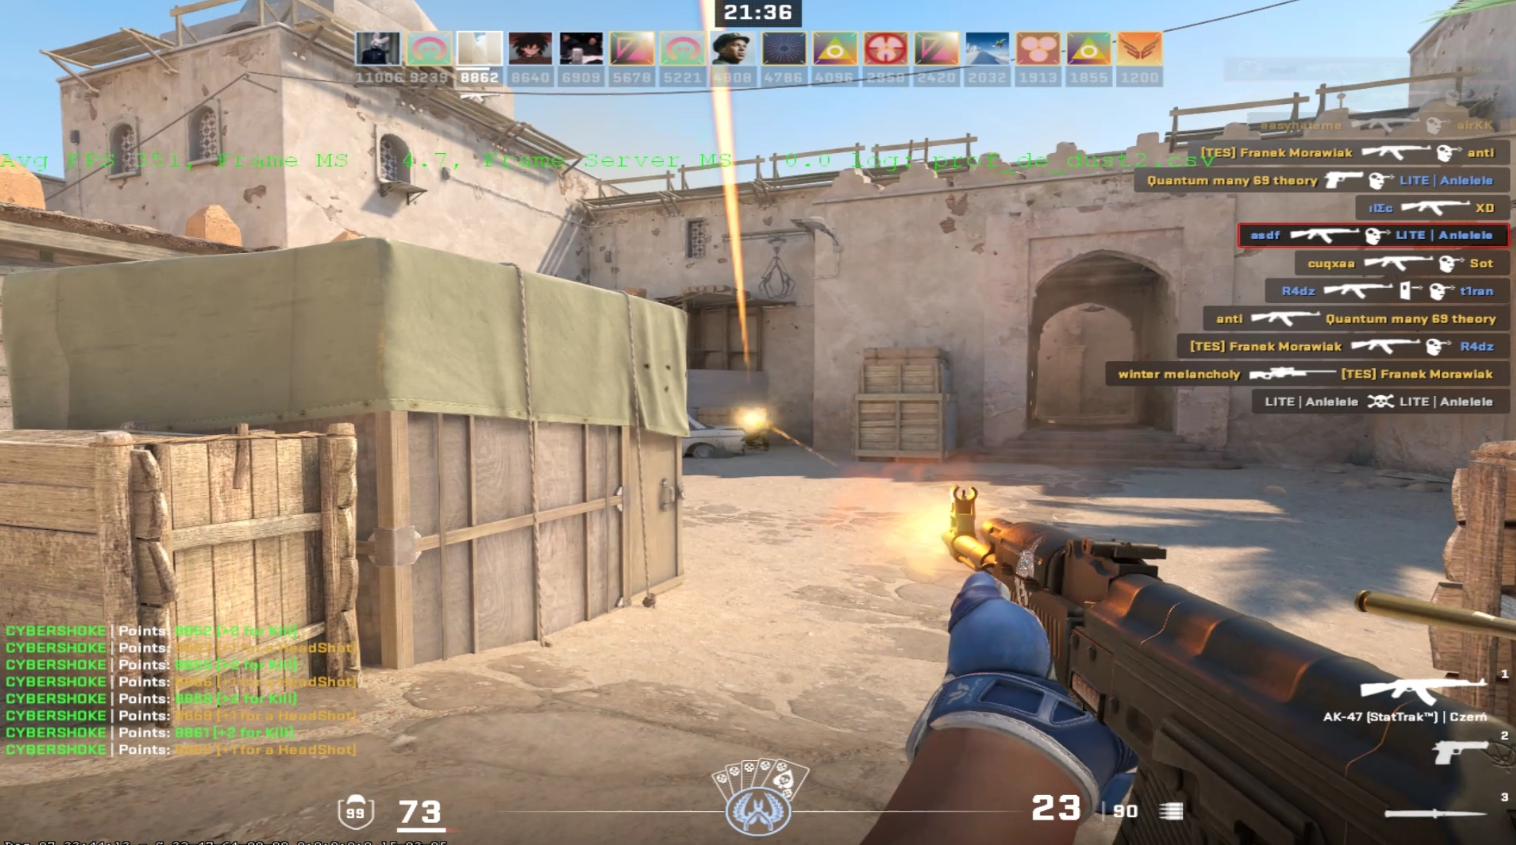 Thour Compared the FPS in Counter-Strike 2 from March 19 and the Latest Version of the Game